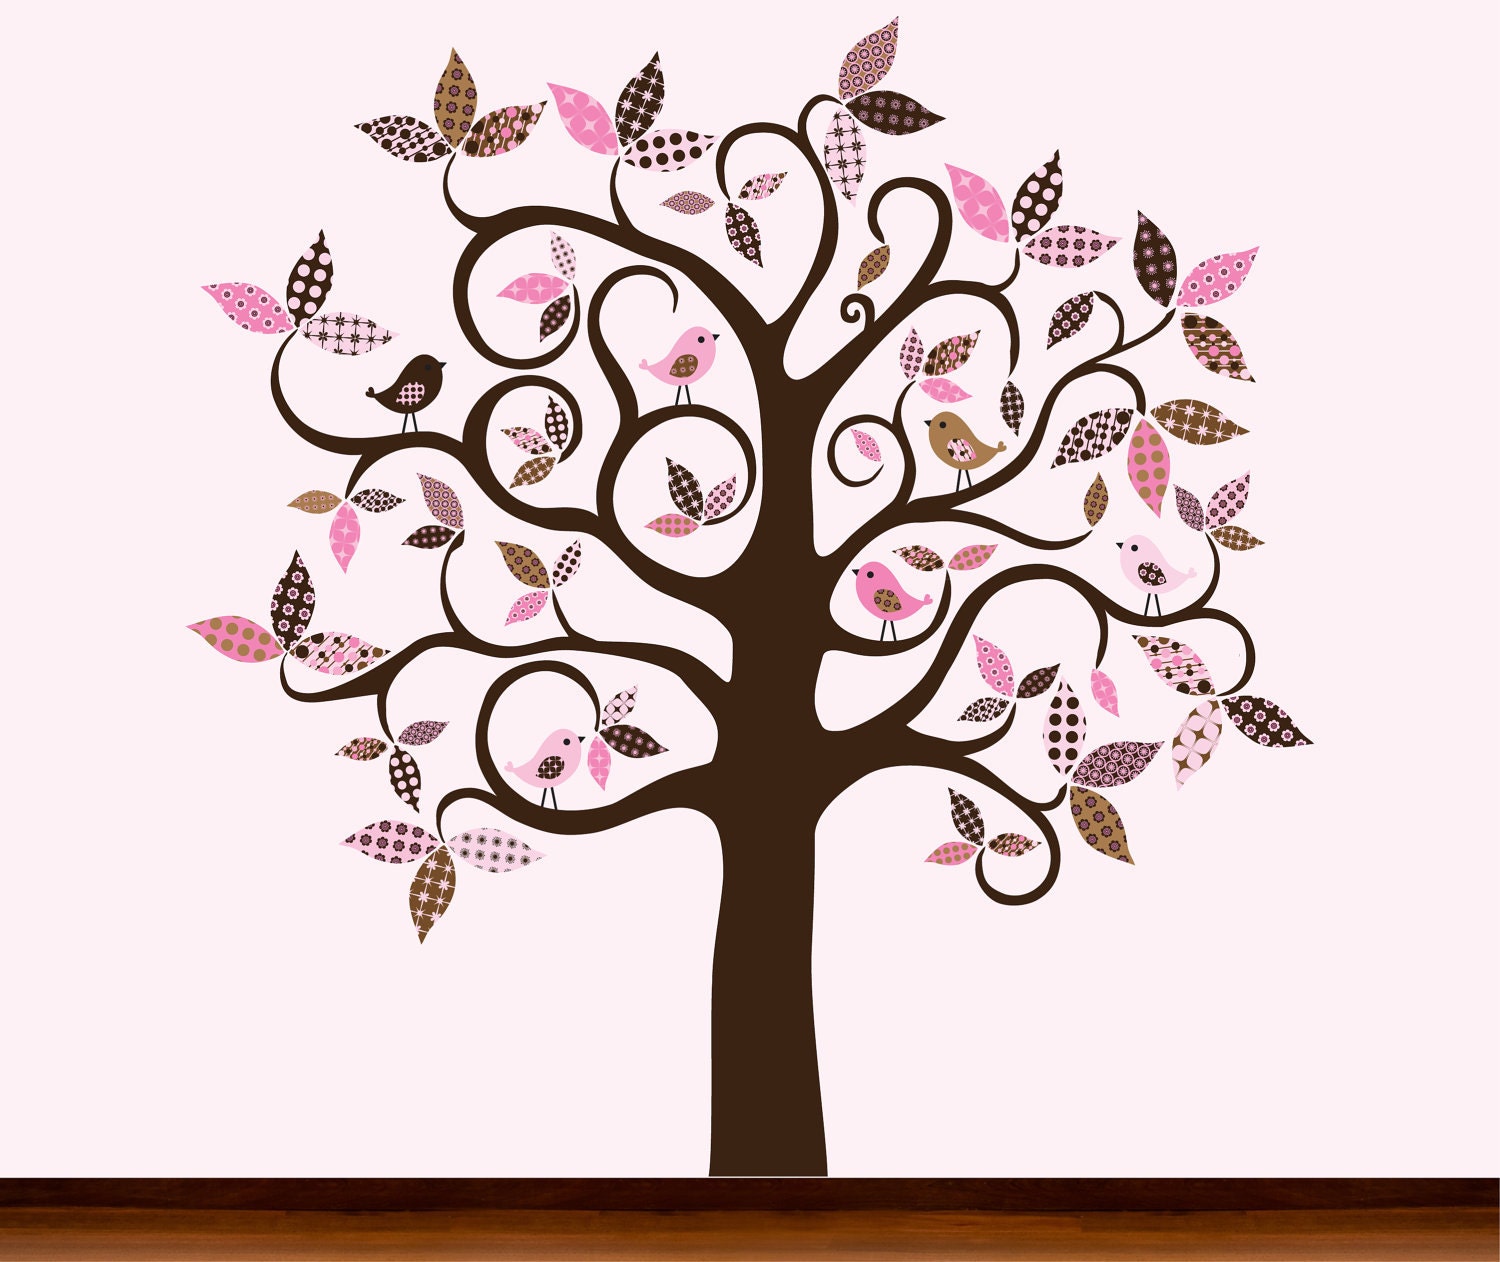 Pink and Brown Design - Chocolate Brown Pattern Tree with Birds - Vinyl Wall Art Decal